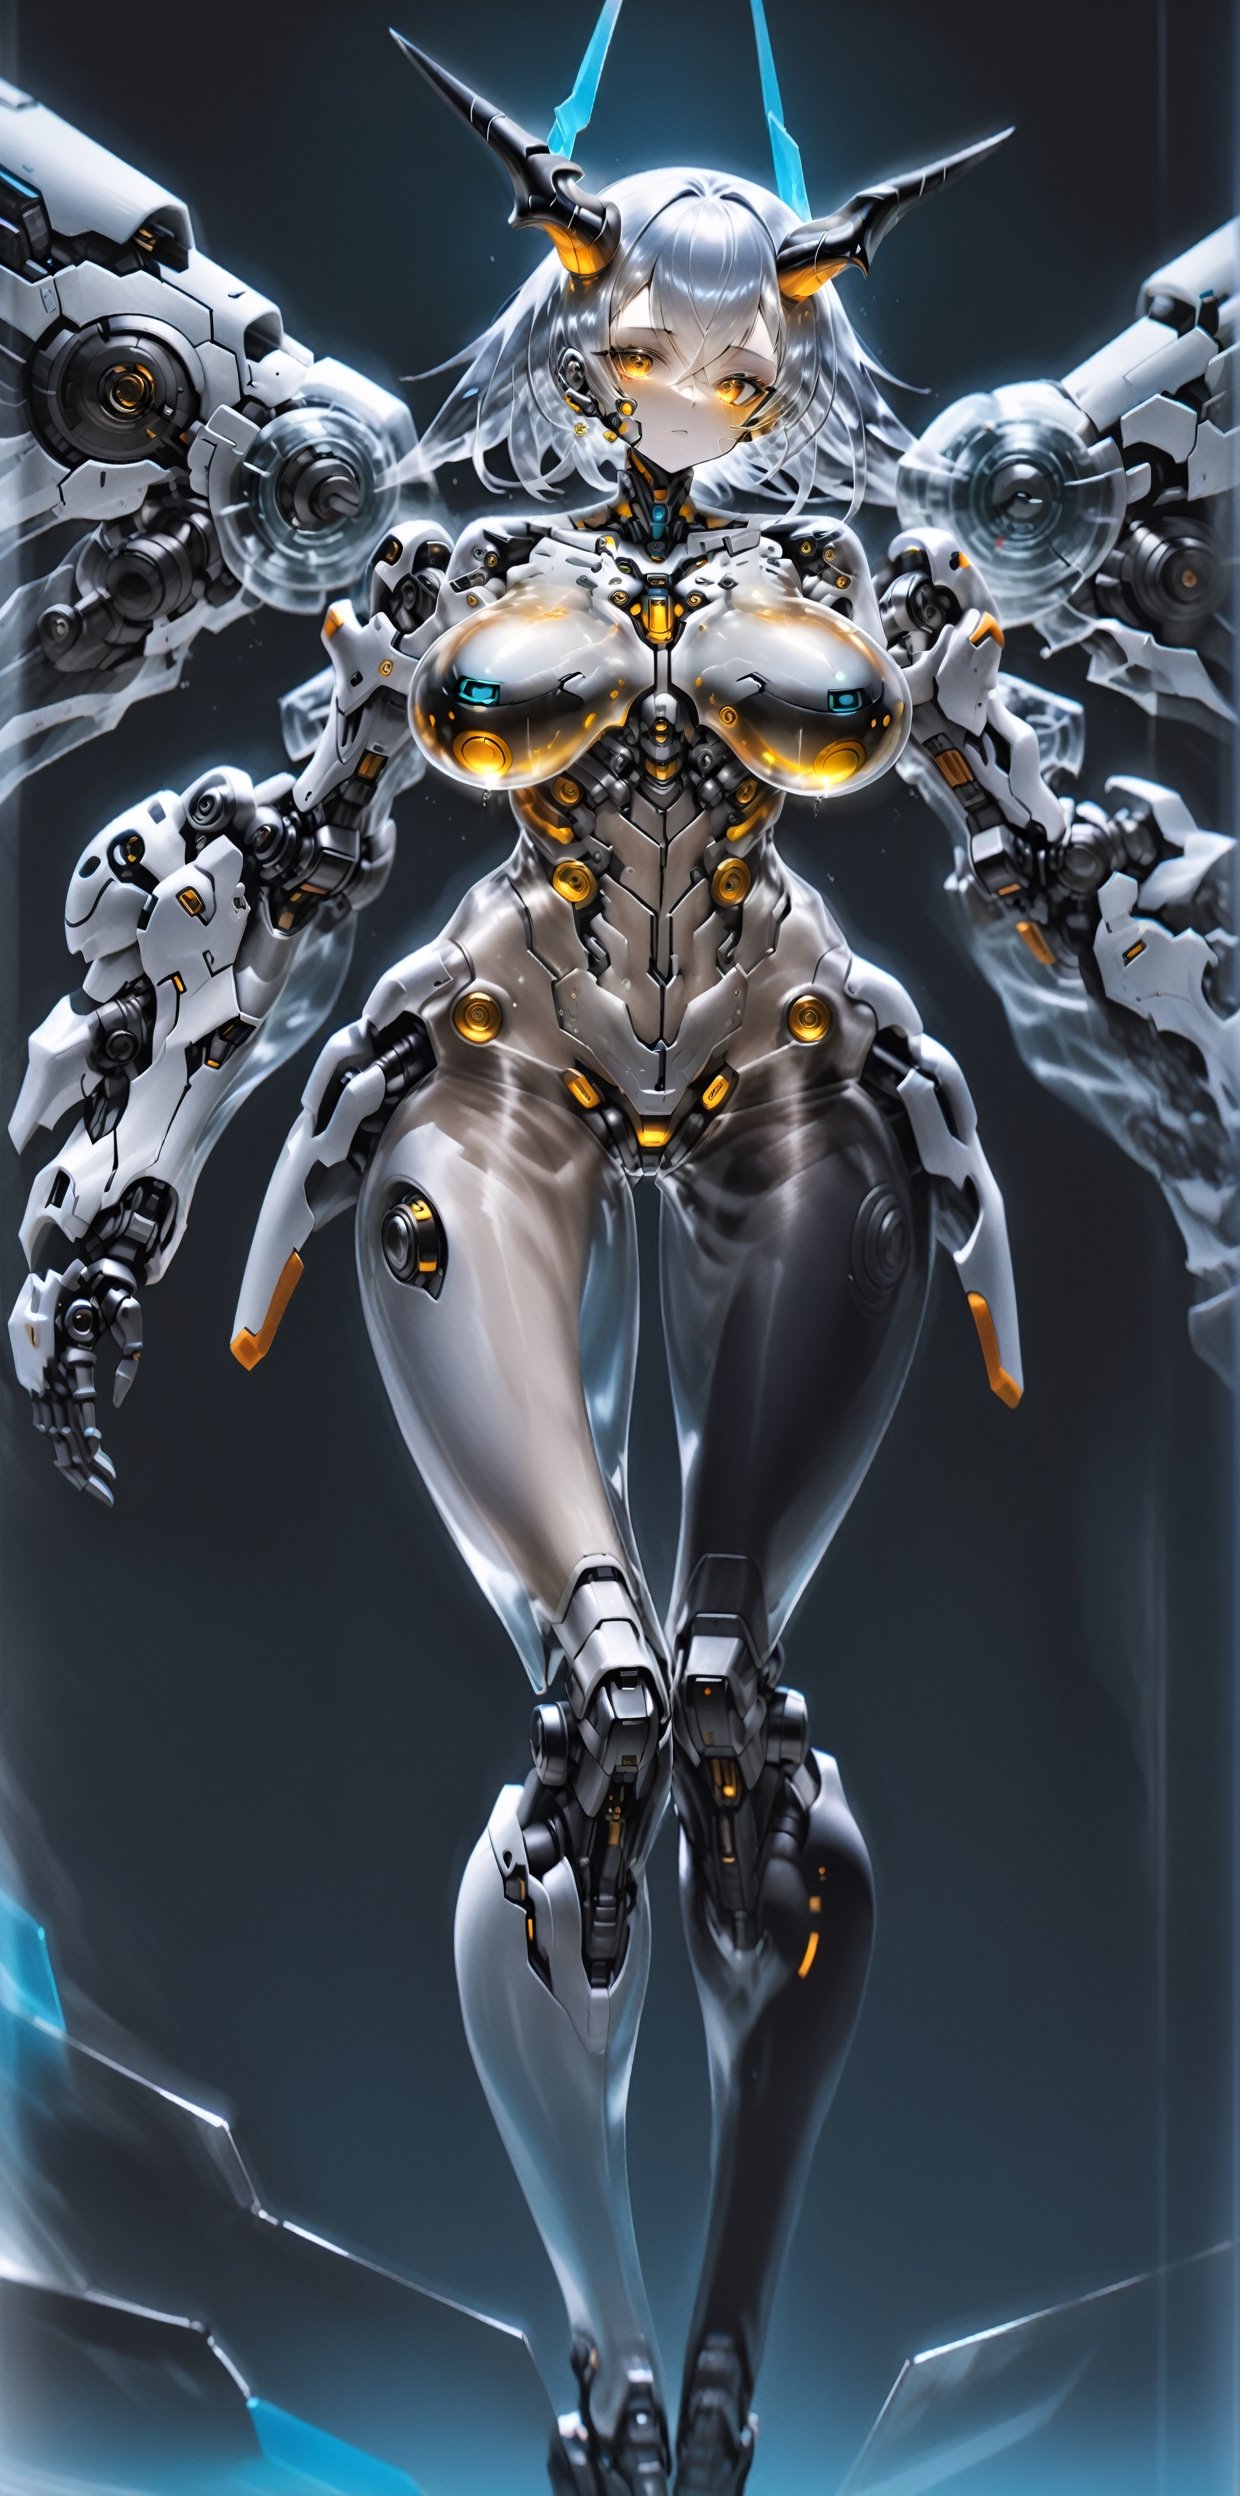 albino robot Girl, (long intricate horns:1.2), adorned with ((transparent body parts:1.2)), revealing the intricate machinery inside, smooth and angular design despite transparent parts, pulsating energy and intricate circuitry visible through ((transparent body parts)),Elegant curvaceous beauty,robot, mechanical arms,Glass Elements,Clear Glass Skin,hubg_mecha_girl,skinbodysuit,Blue Backlight,cyborg,bodysuit,breast bags